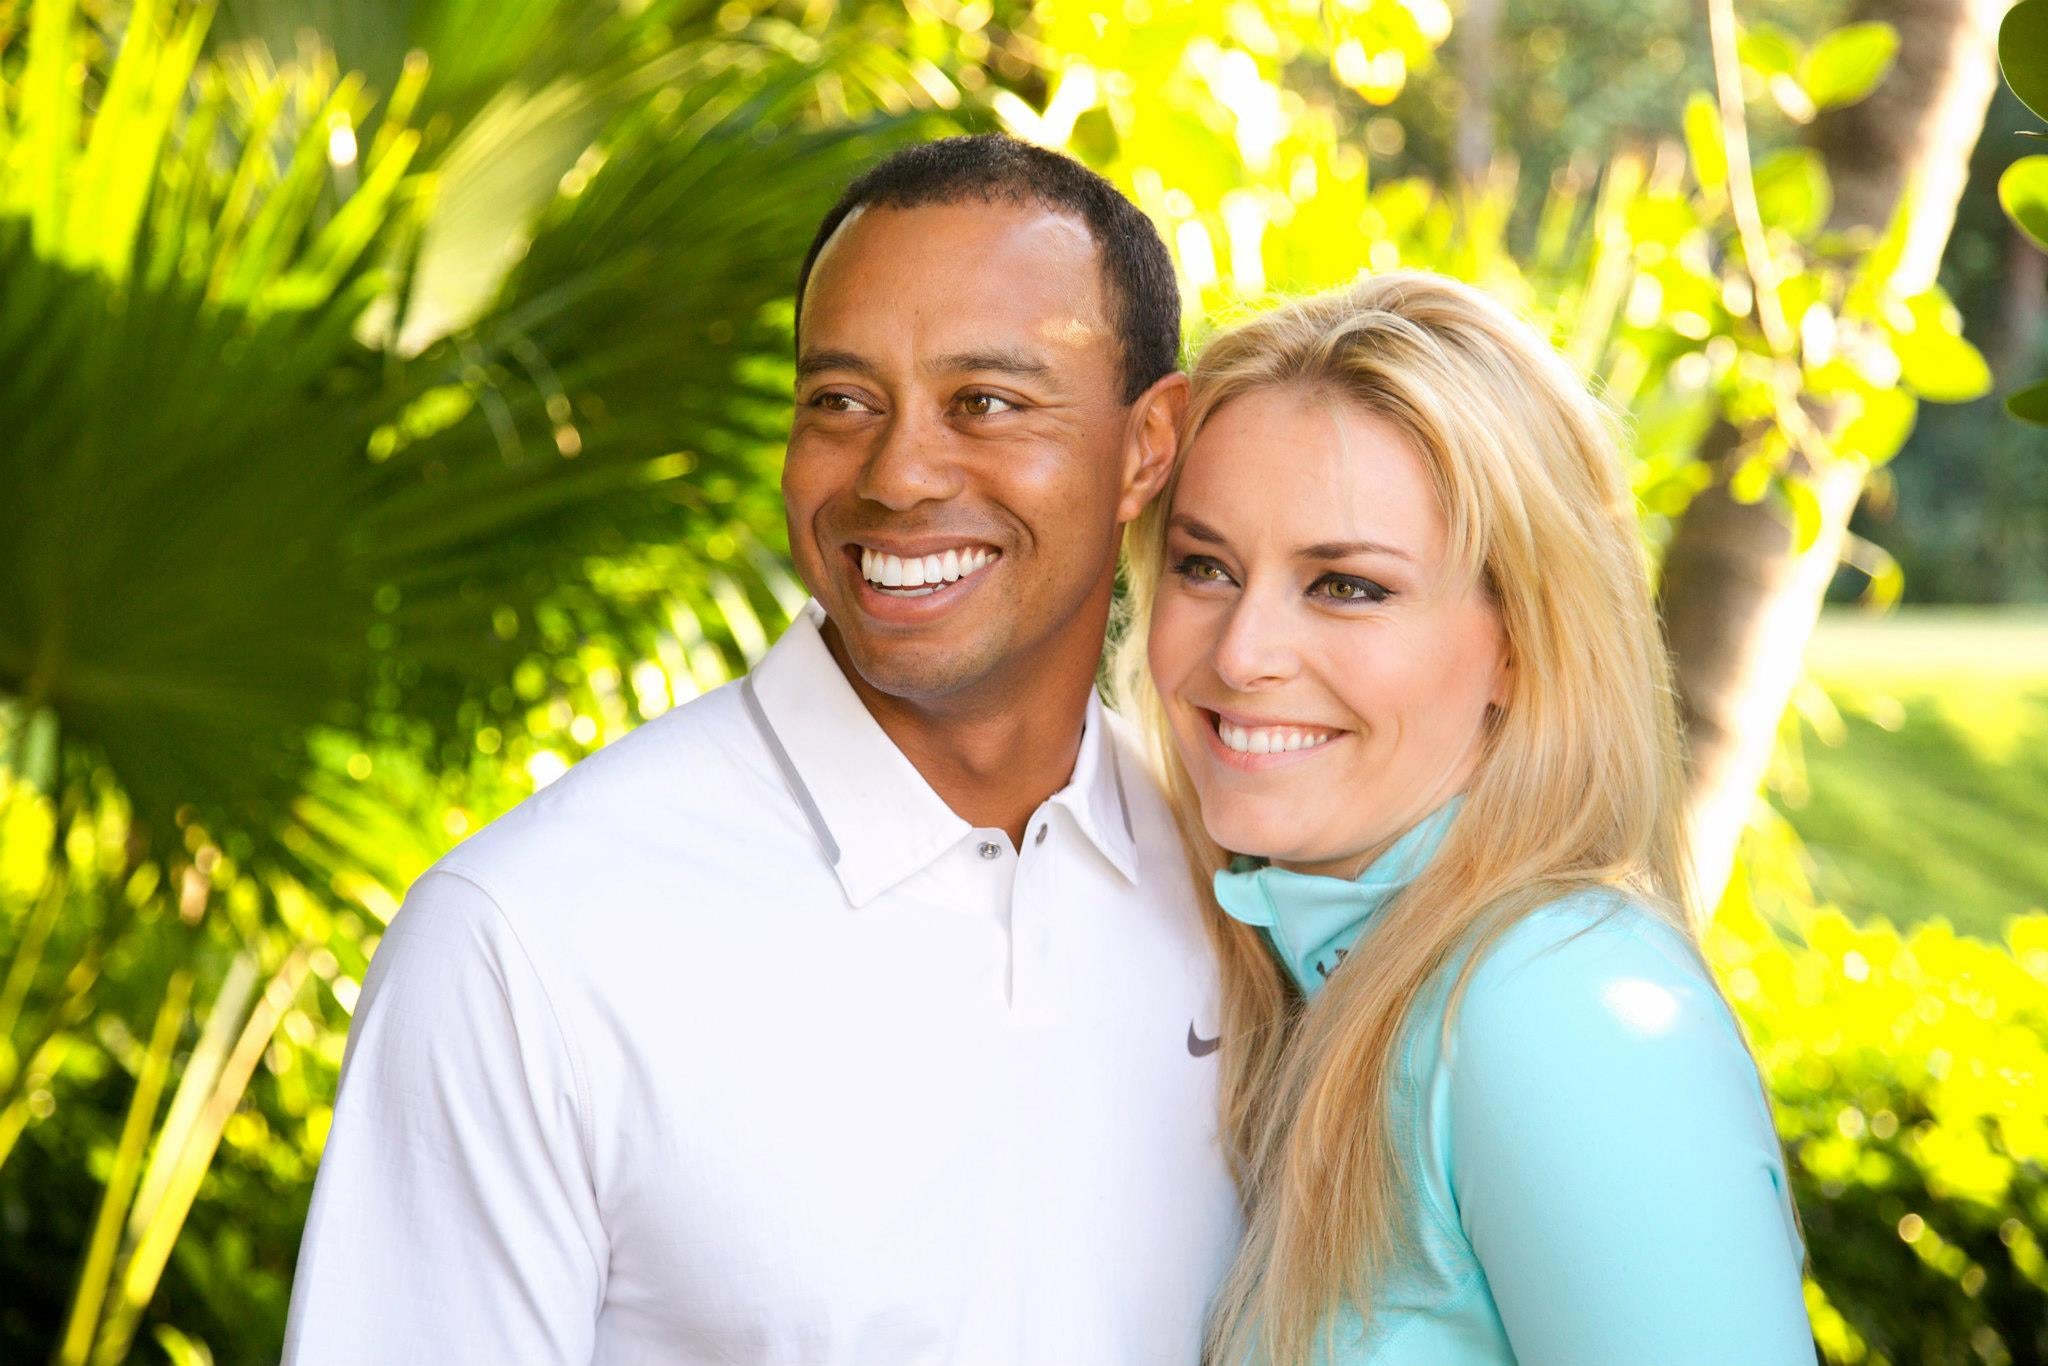 Tiger Woods confirms relationship with Olympic skier Lindsey Vonn The Independent The Independent